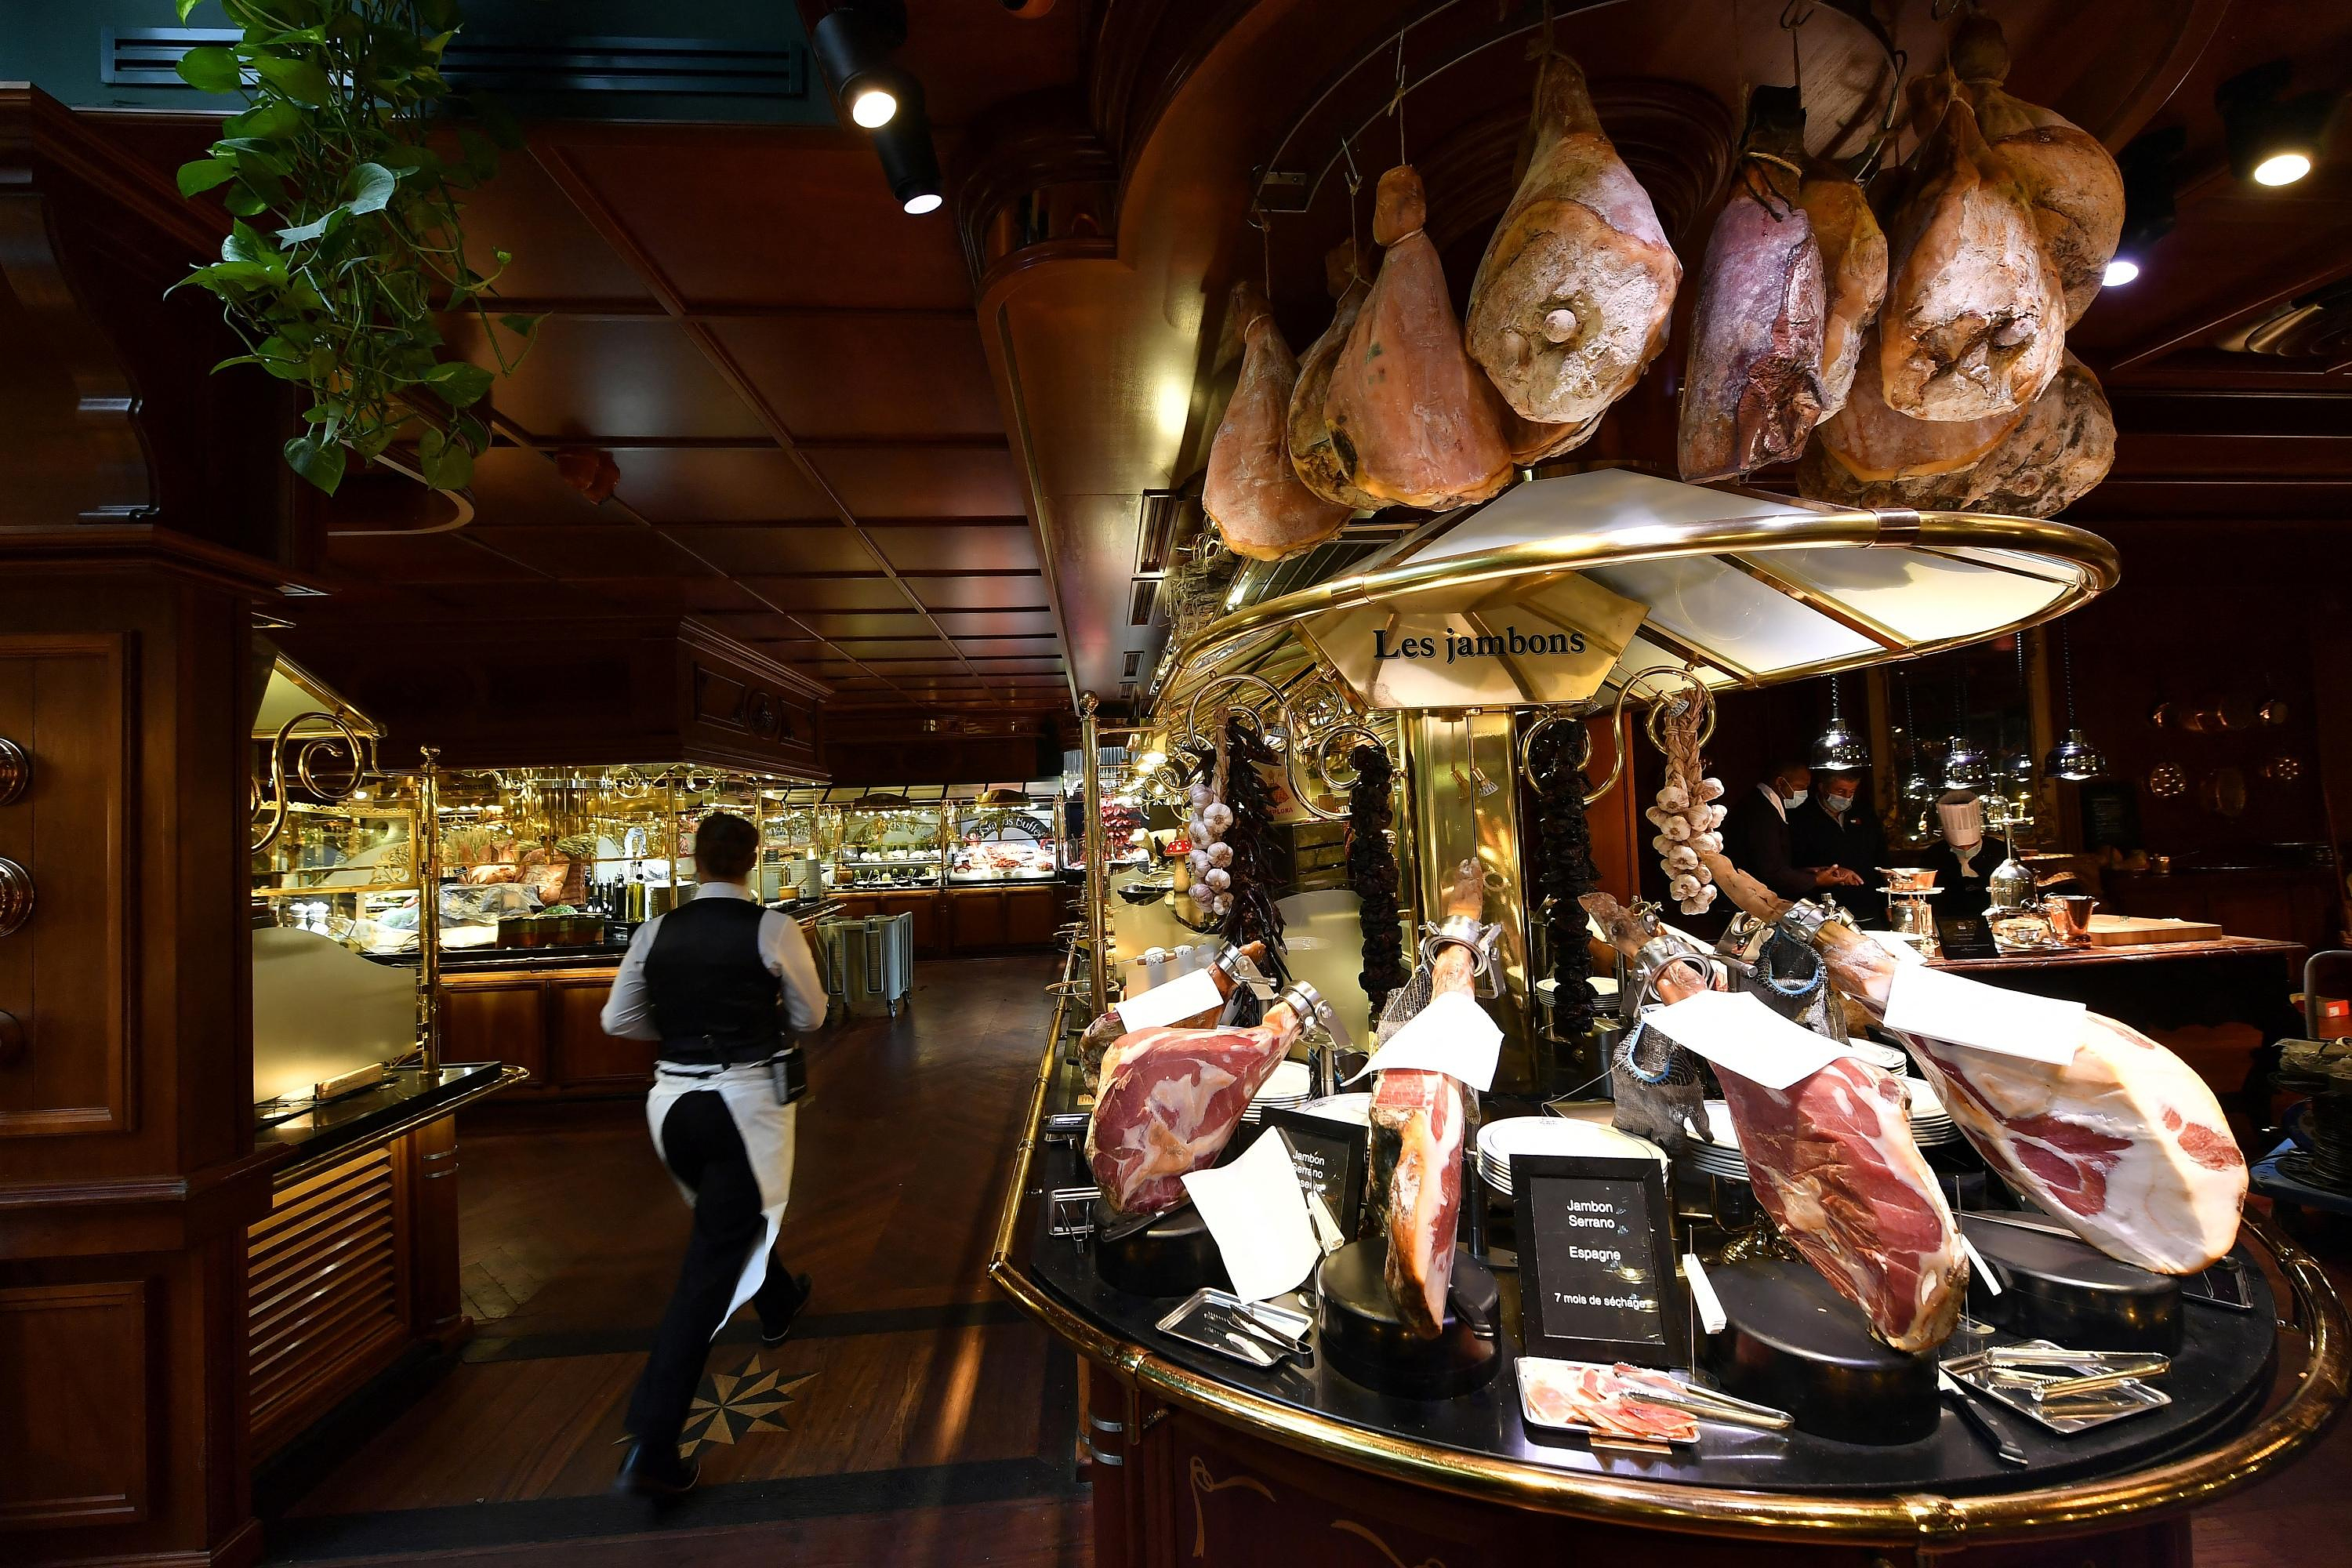 “A win-win agreement”: Les Grands buffets, the largest restaurant in France, will remain in Narbonne